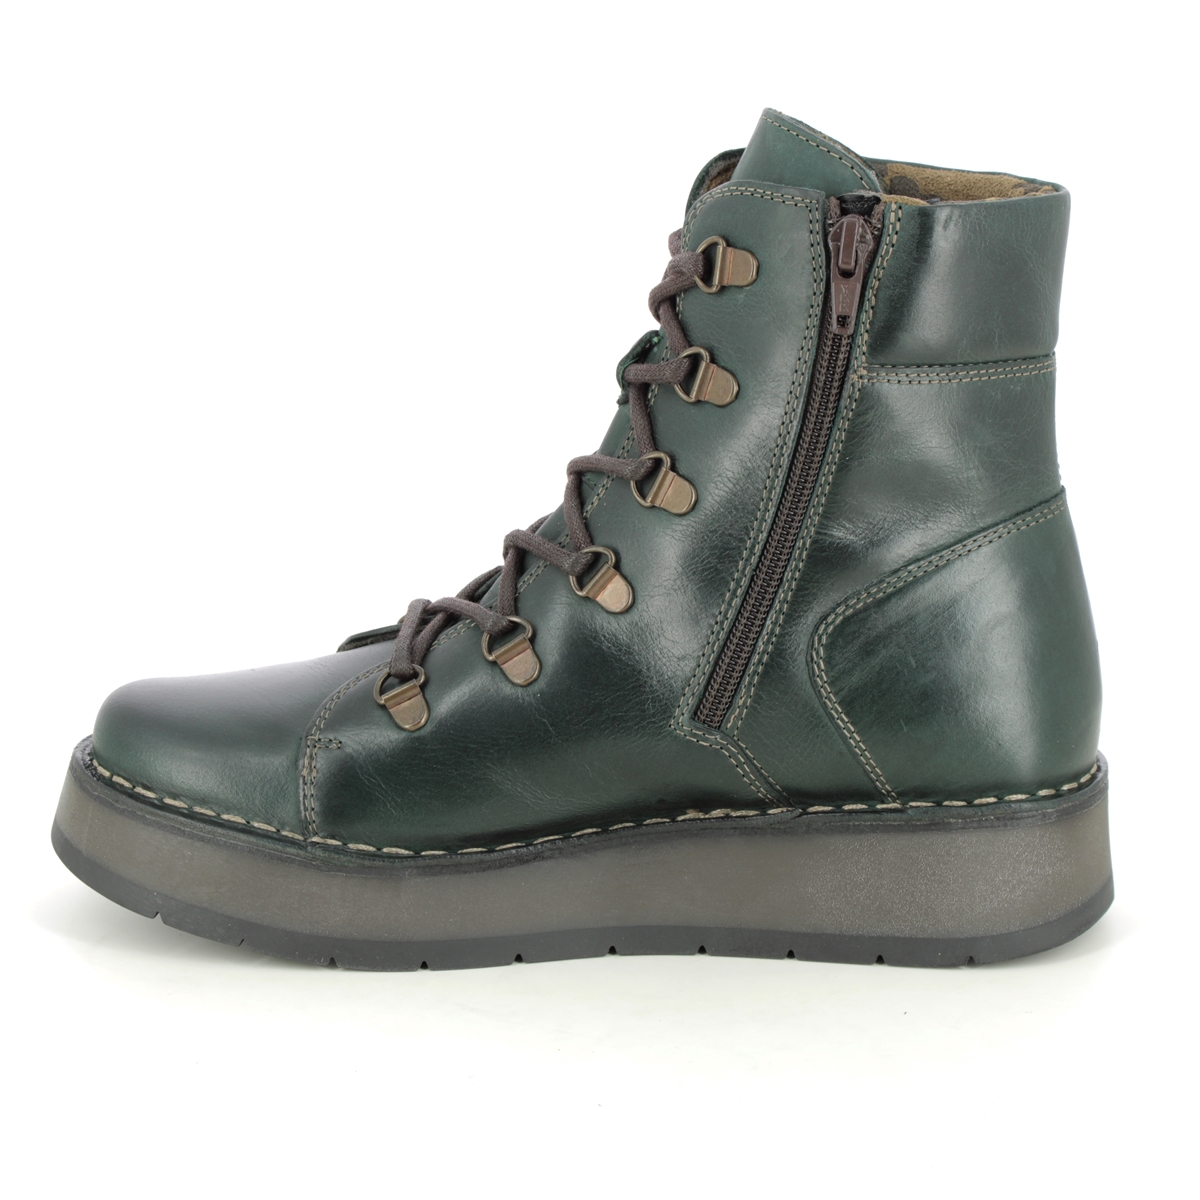 Fly London Roxy Ravi Petrol leather Womens Lace Up Boots P211094-002